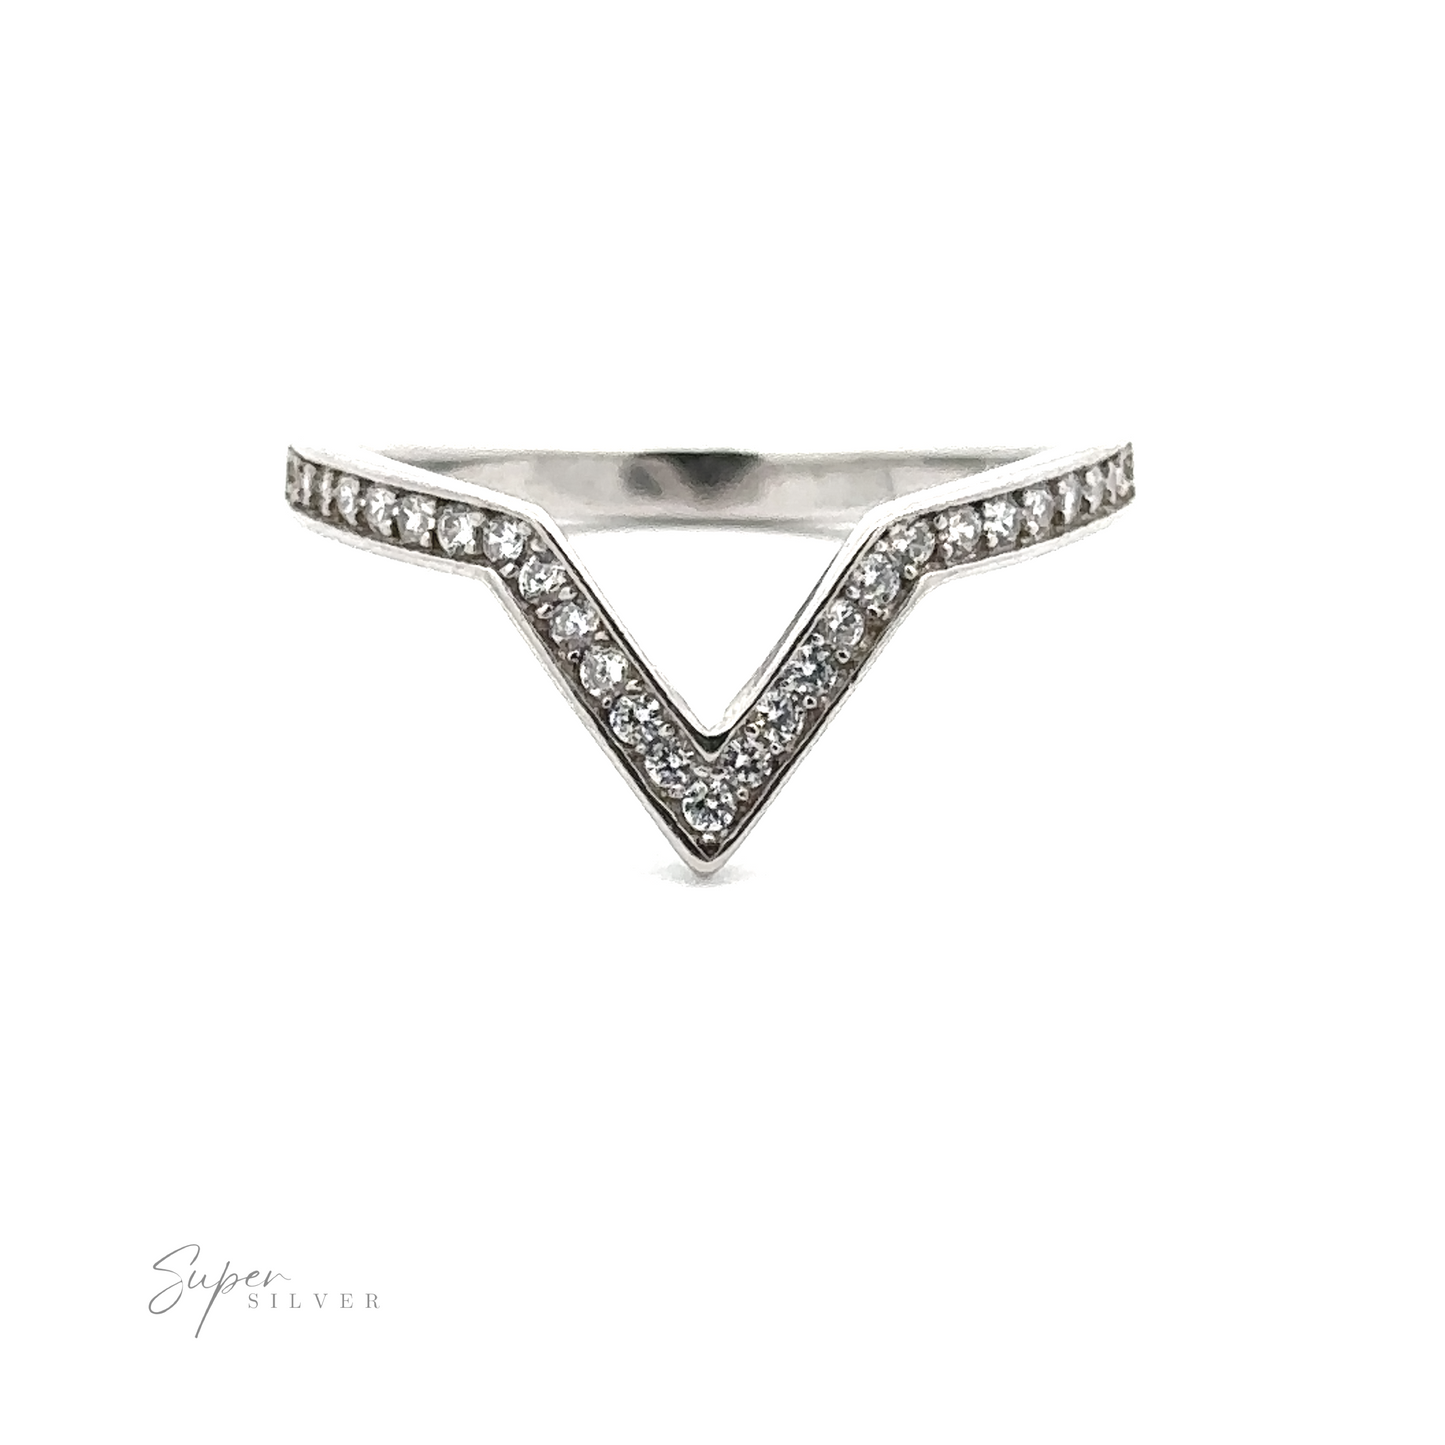 A Channel Set Cubic Zirconia Chevron Ring with small embedded diamonds and cubic zirconia, set against a white background. The words "Super Silver" are in the bottom left corner.